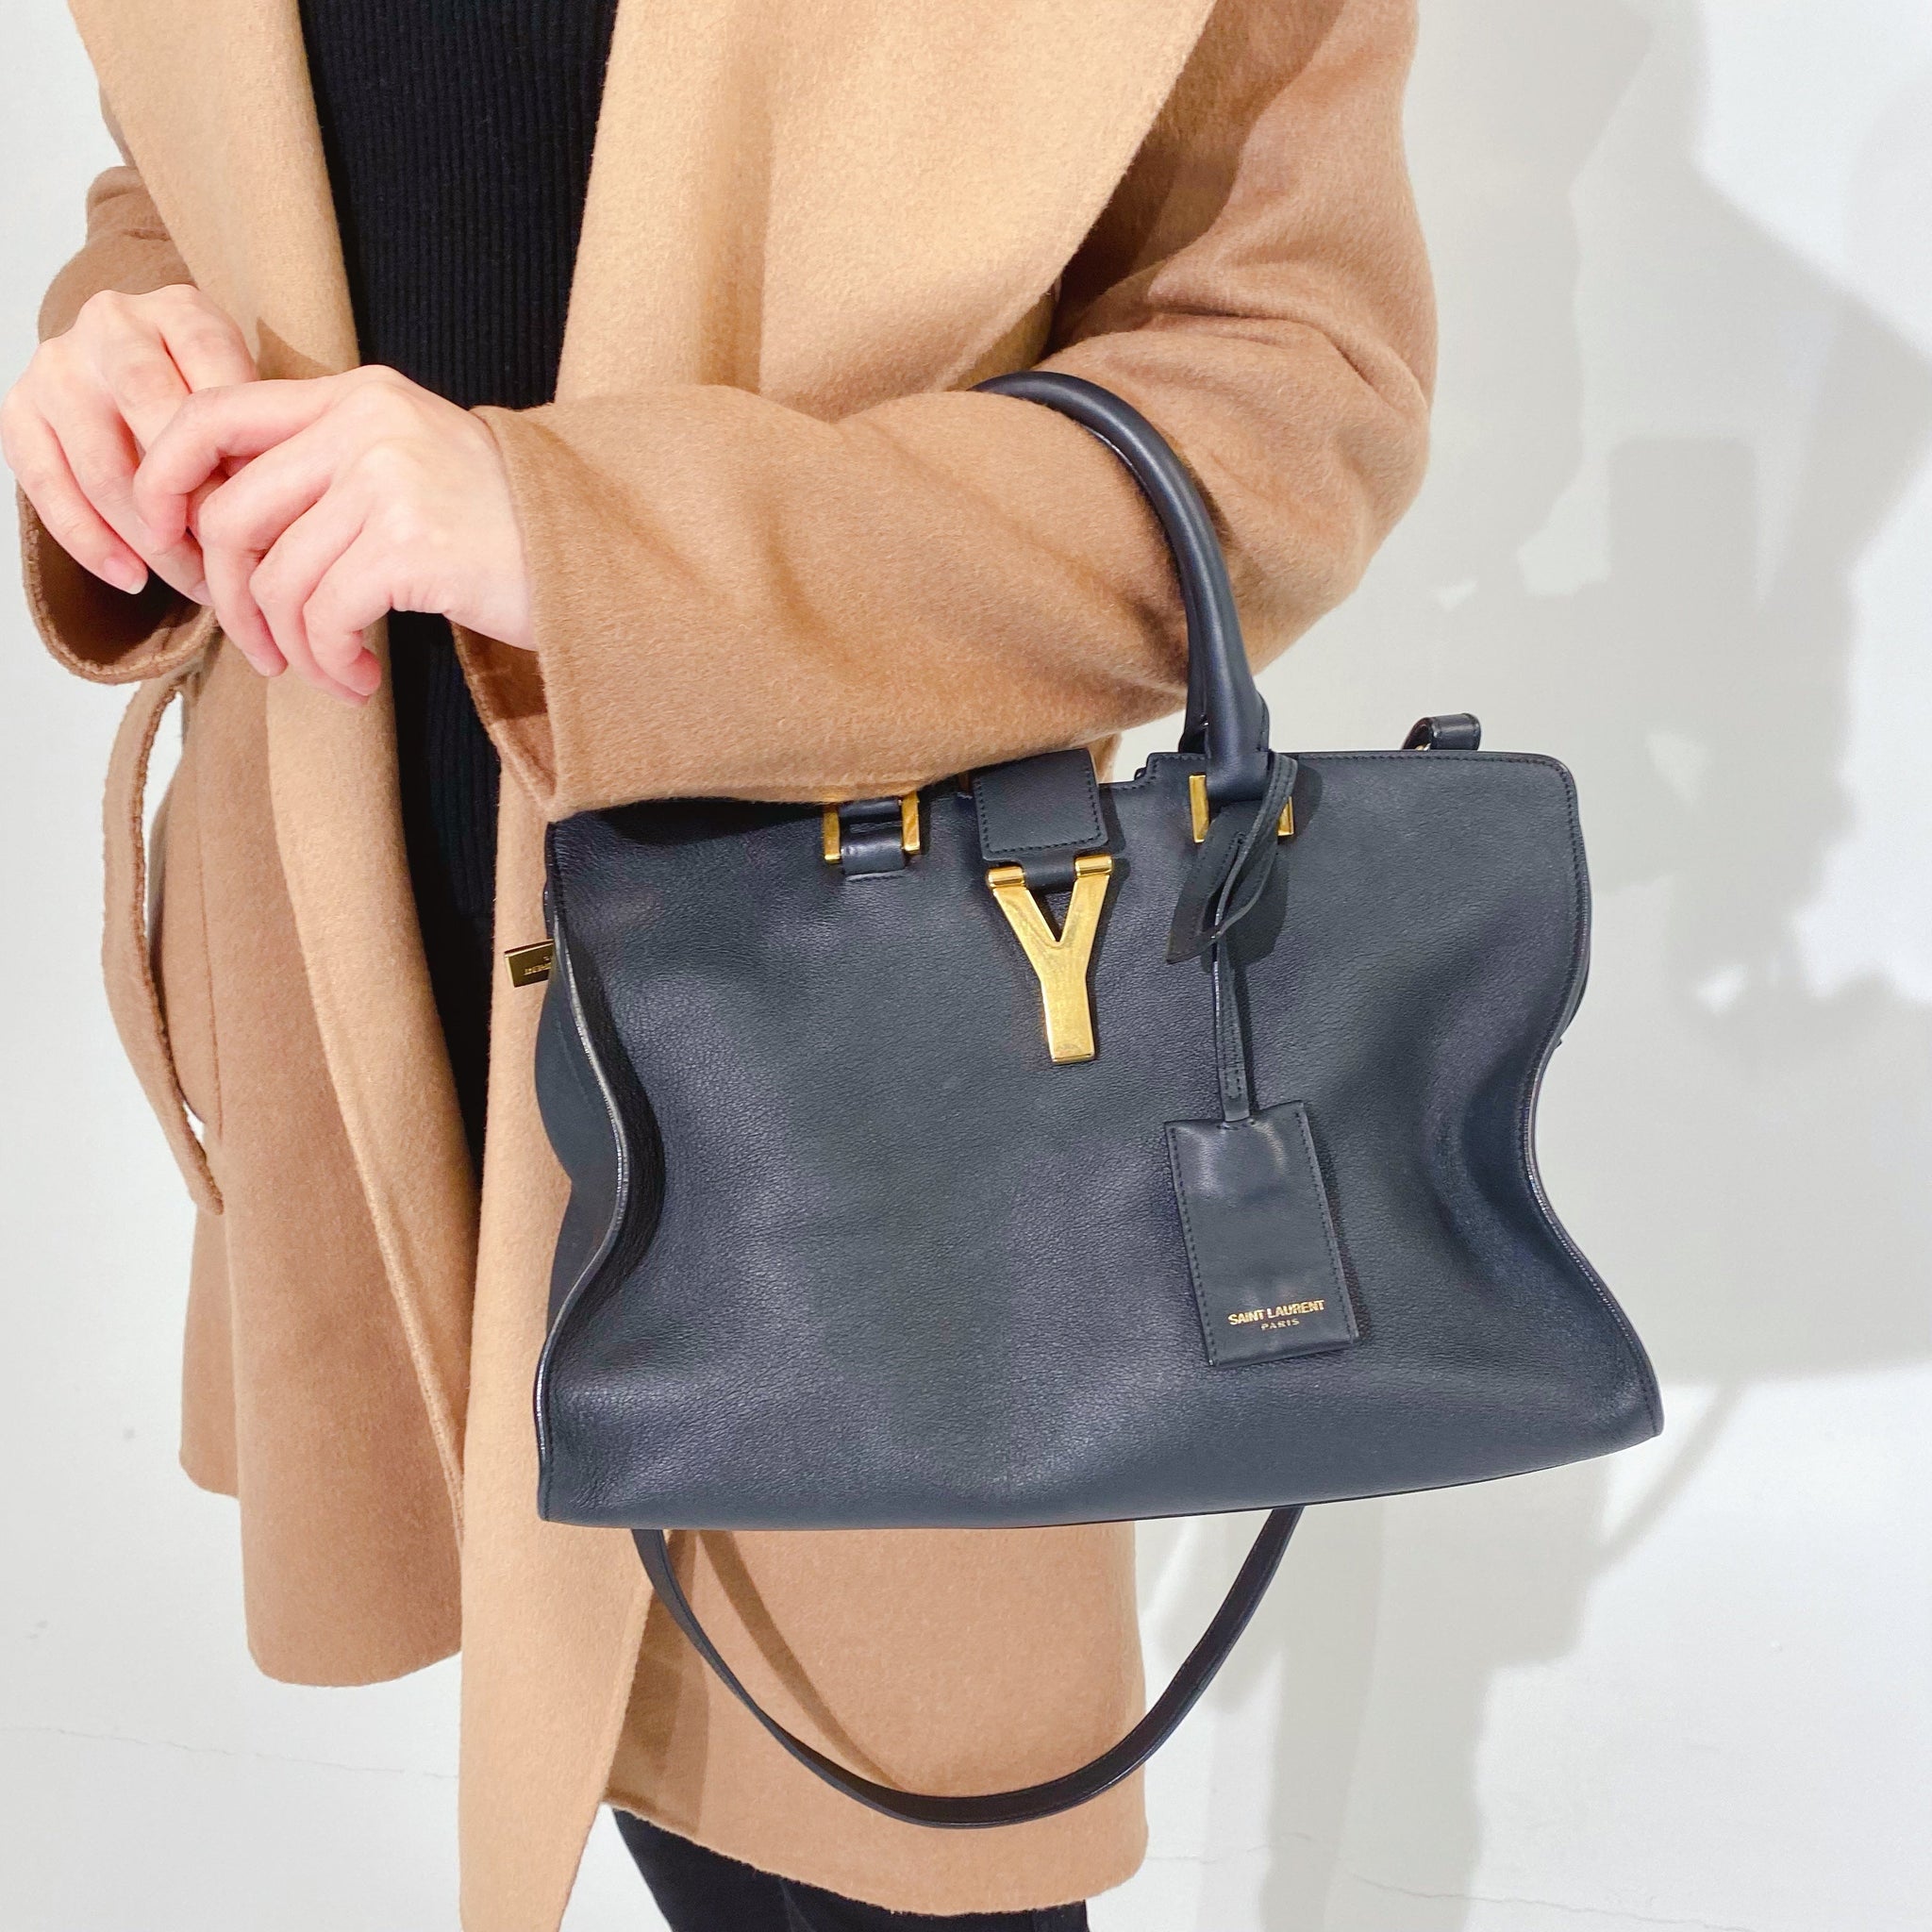 Yves Saint Laurent Y Cabas Tote Small